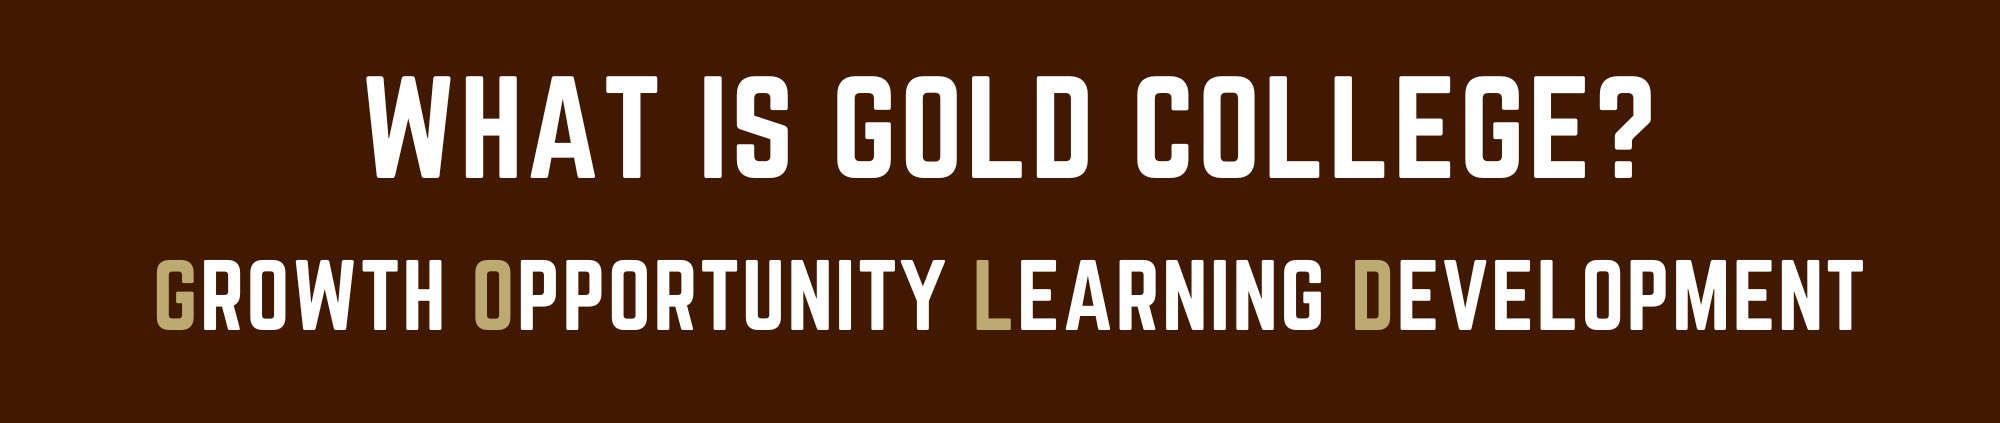 What is Gold College? Growth Opportunity Learning Development